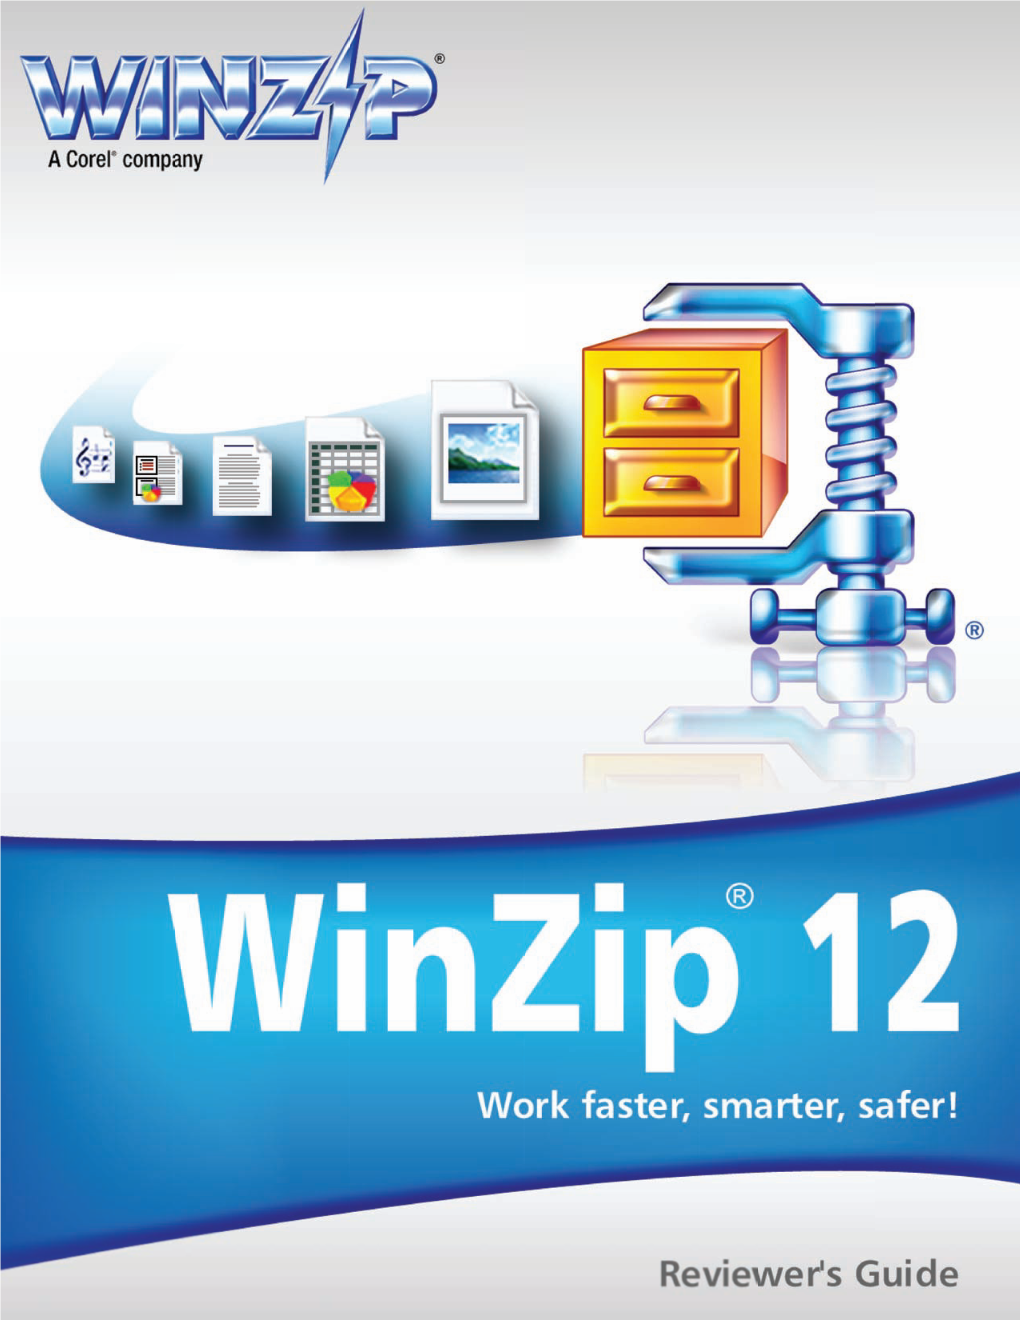 Winzip 12 Reviewer's Guide